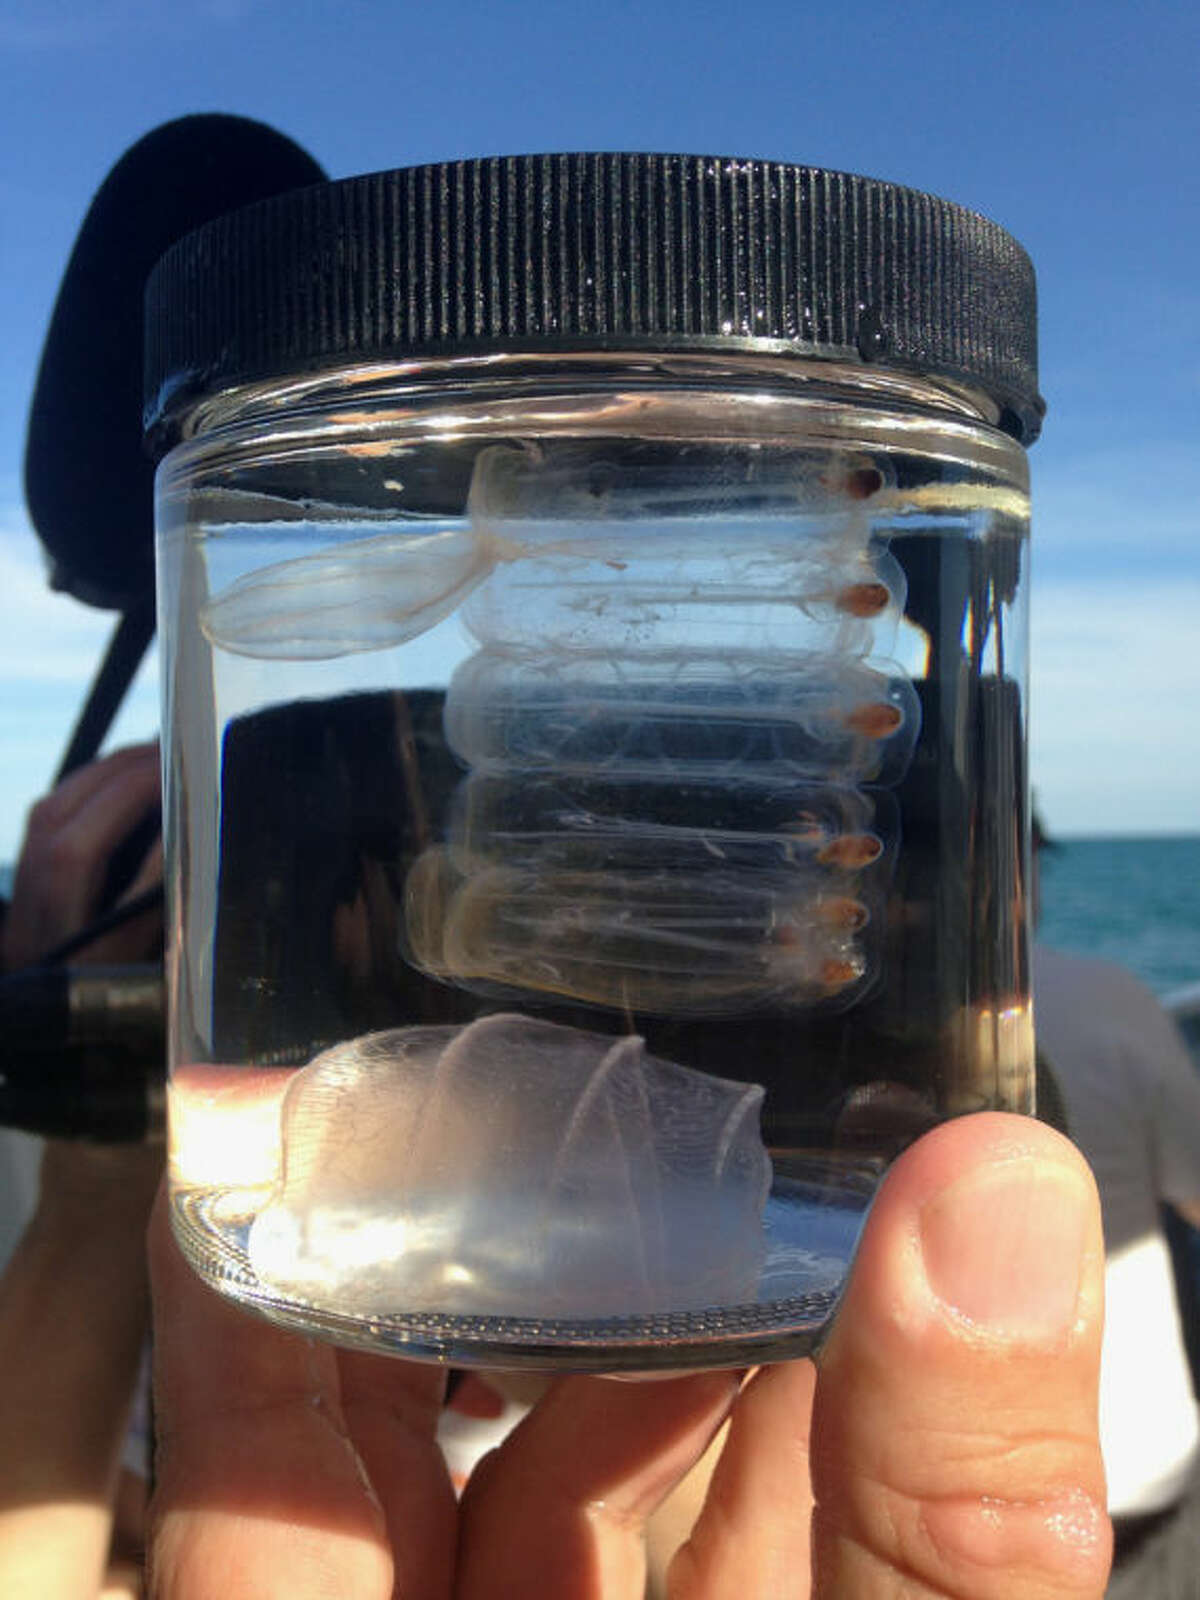 This March 30, 2014, photo shows a sea salp and some mysterious creatures named comb jellies, caught by University of Florida neurobiologist Leonid Moroz while diving in the Gulf Stream off the coast of Florida. The animals are headed for Moroz's unique floating laboratory, where he aims to decode the genomic blueprints of fragile marine life in real time _ on board the ship where they were caught. (AP Photo/Lauran Neergaard)